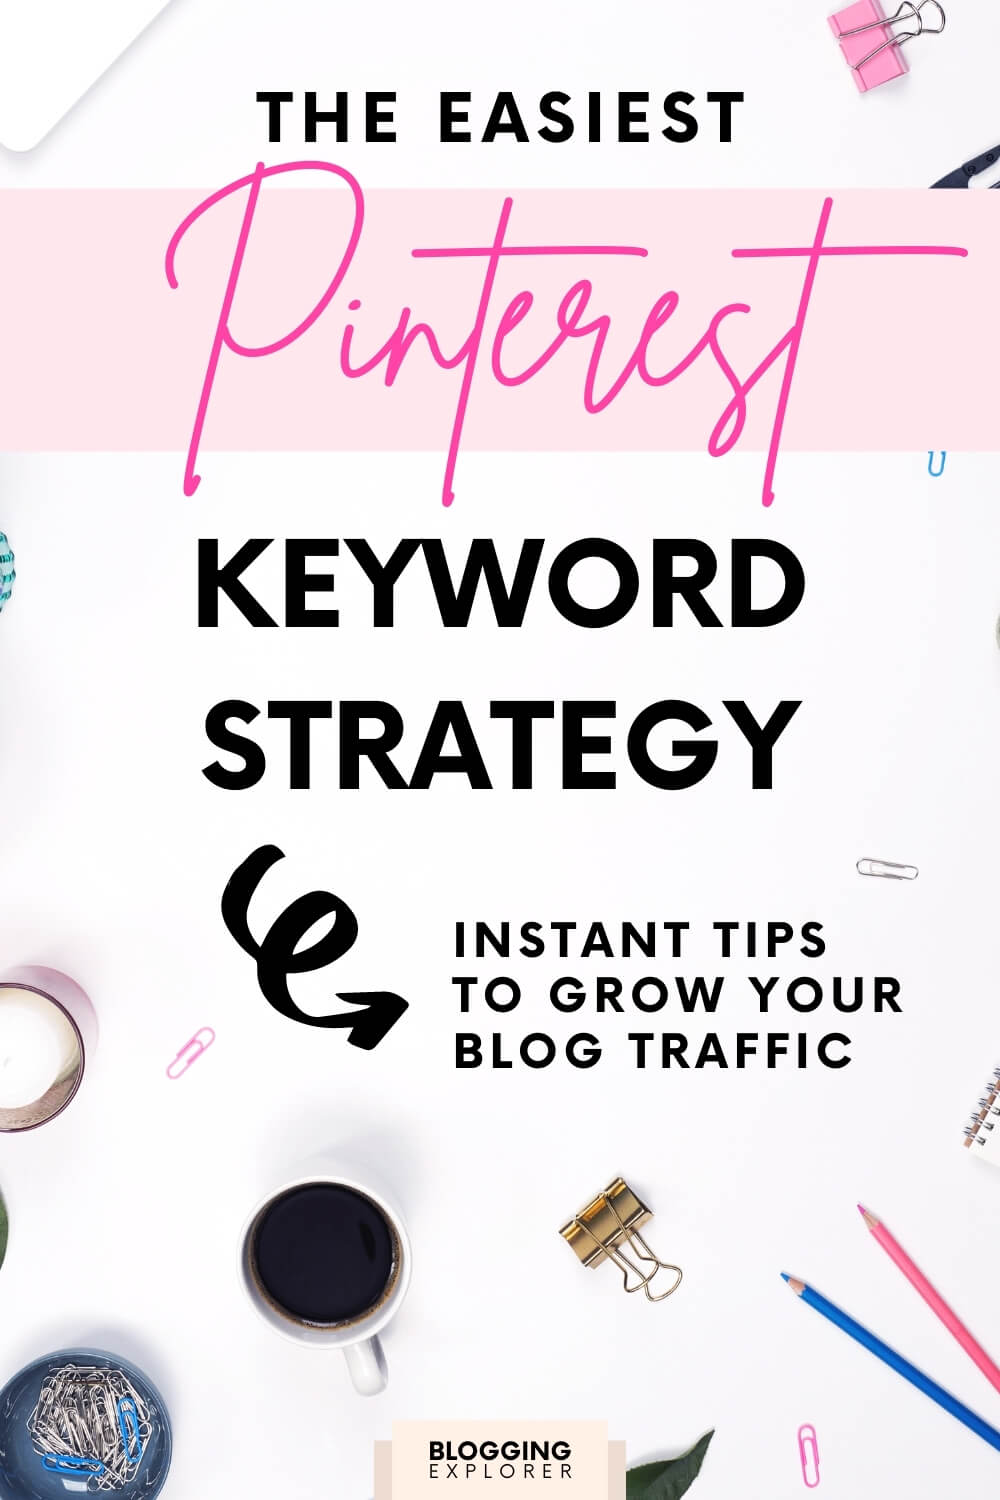 How to Find Powerful Pinterest Keywords to Grow Your Blog